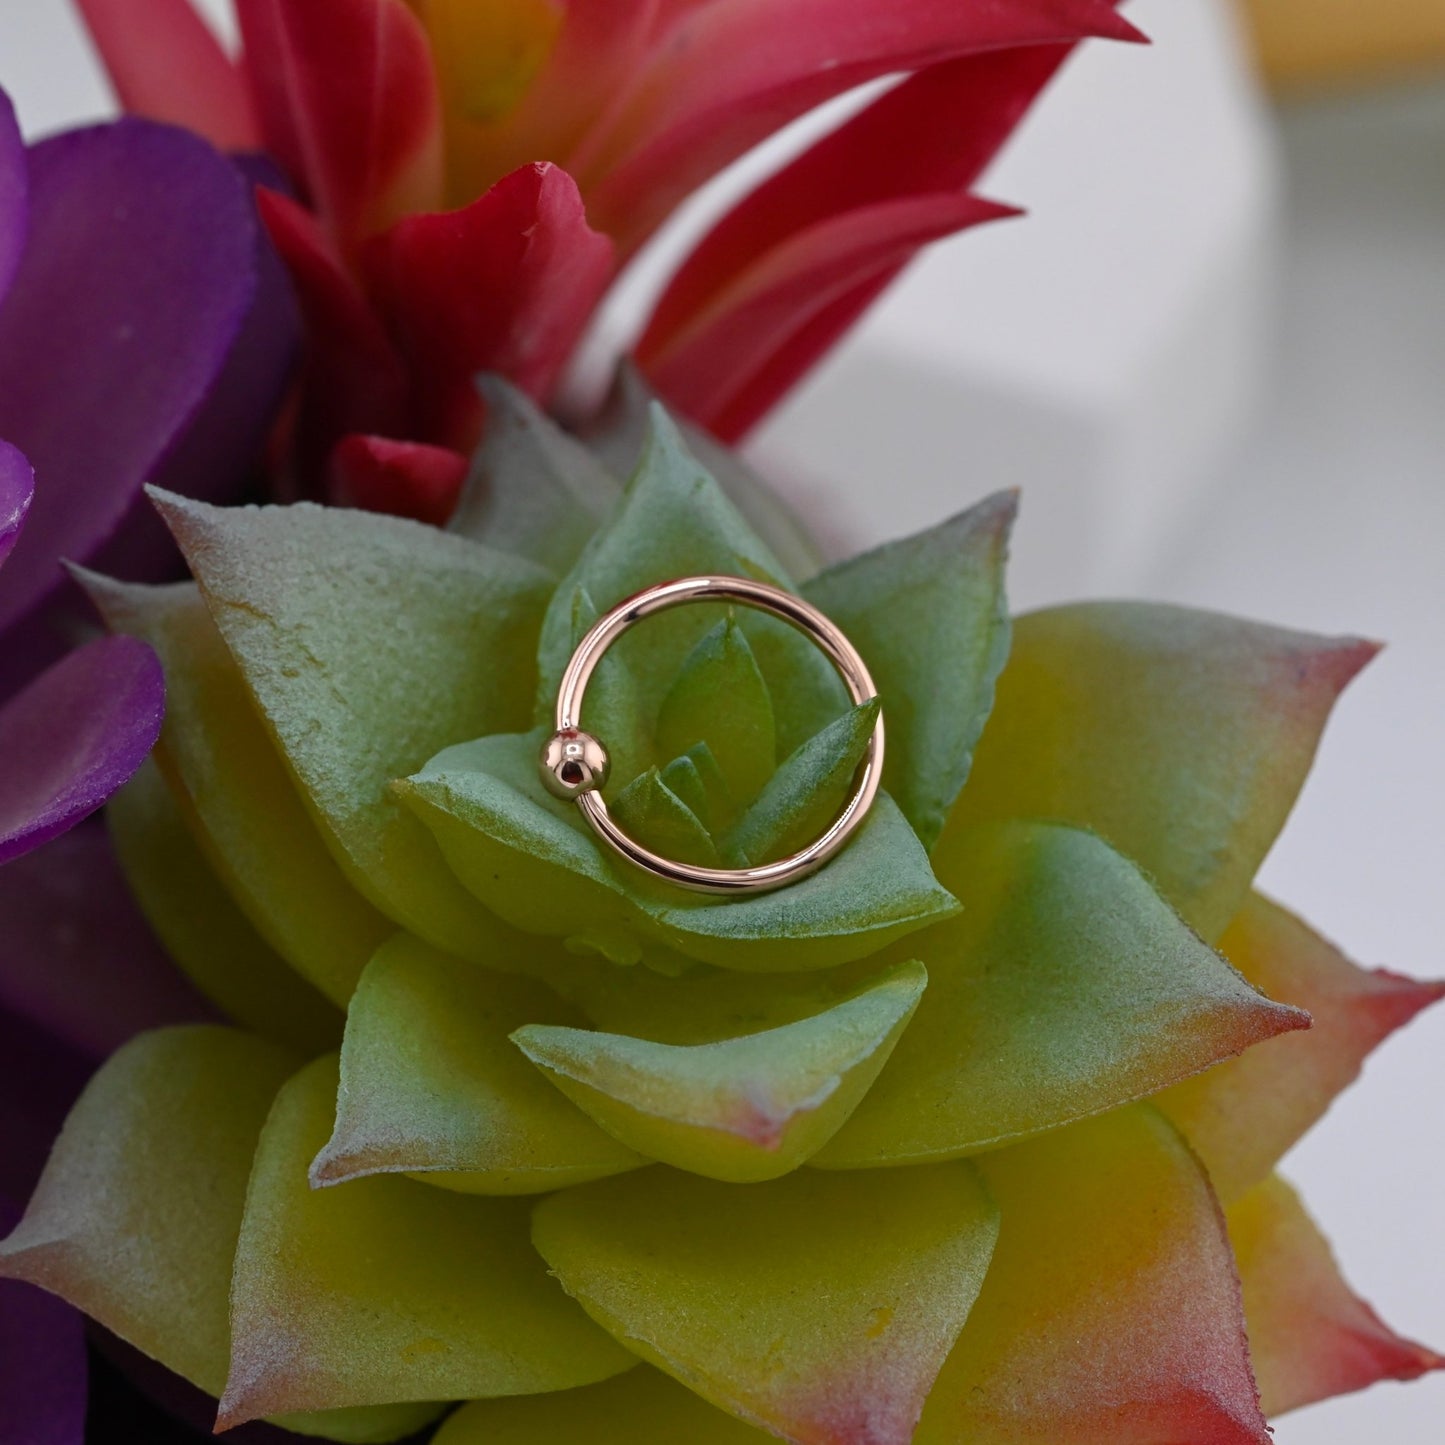 18g Fixed Bead Ring with 3/32" Bead - Agave in Bloom